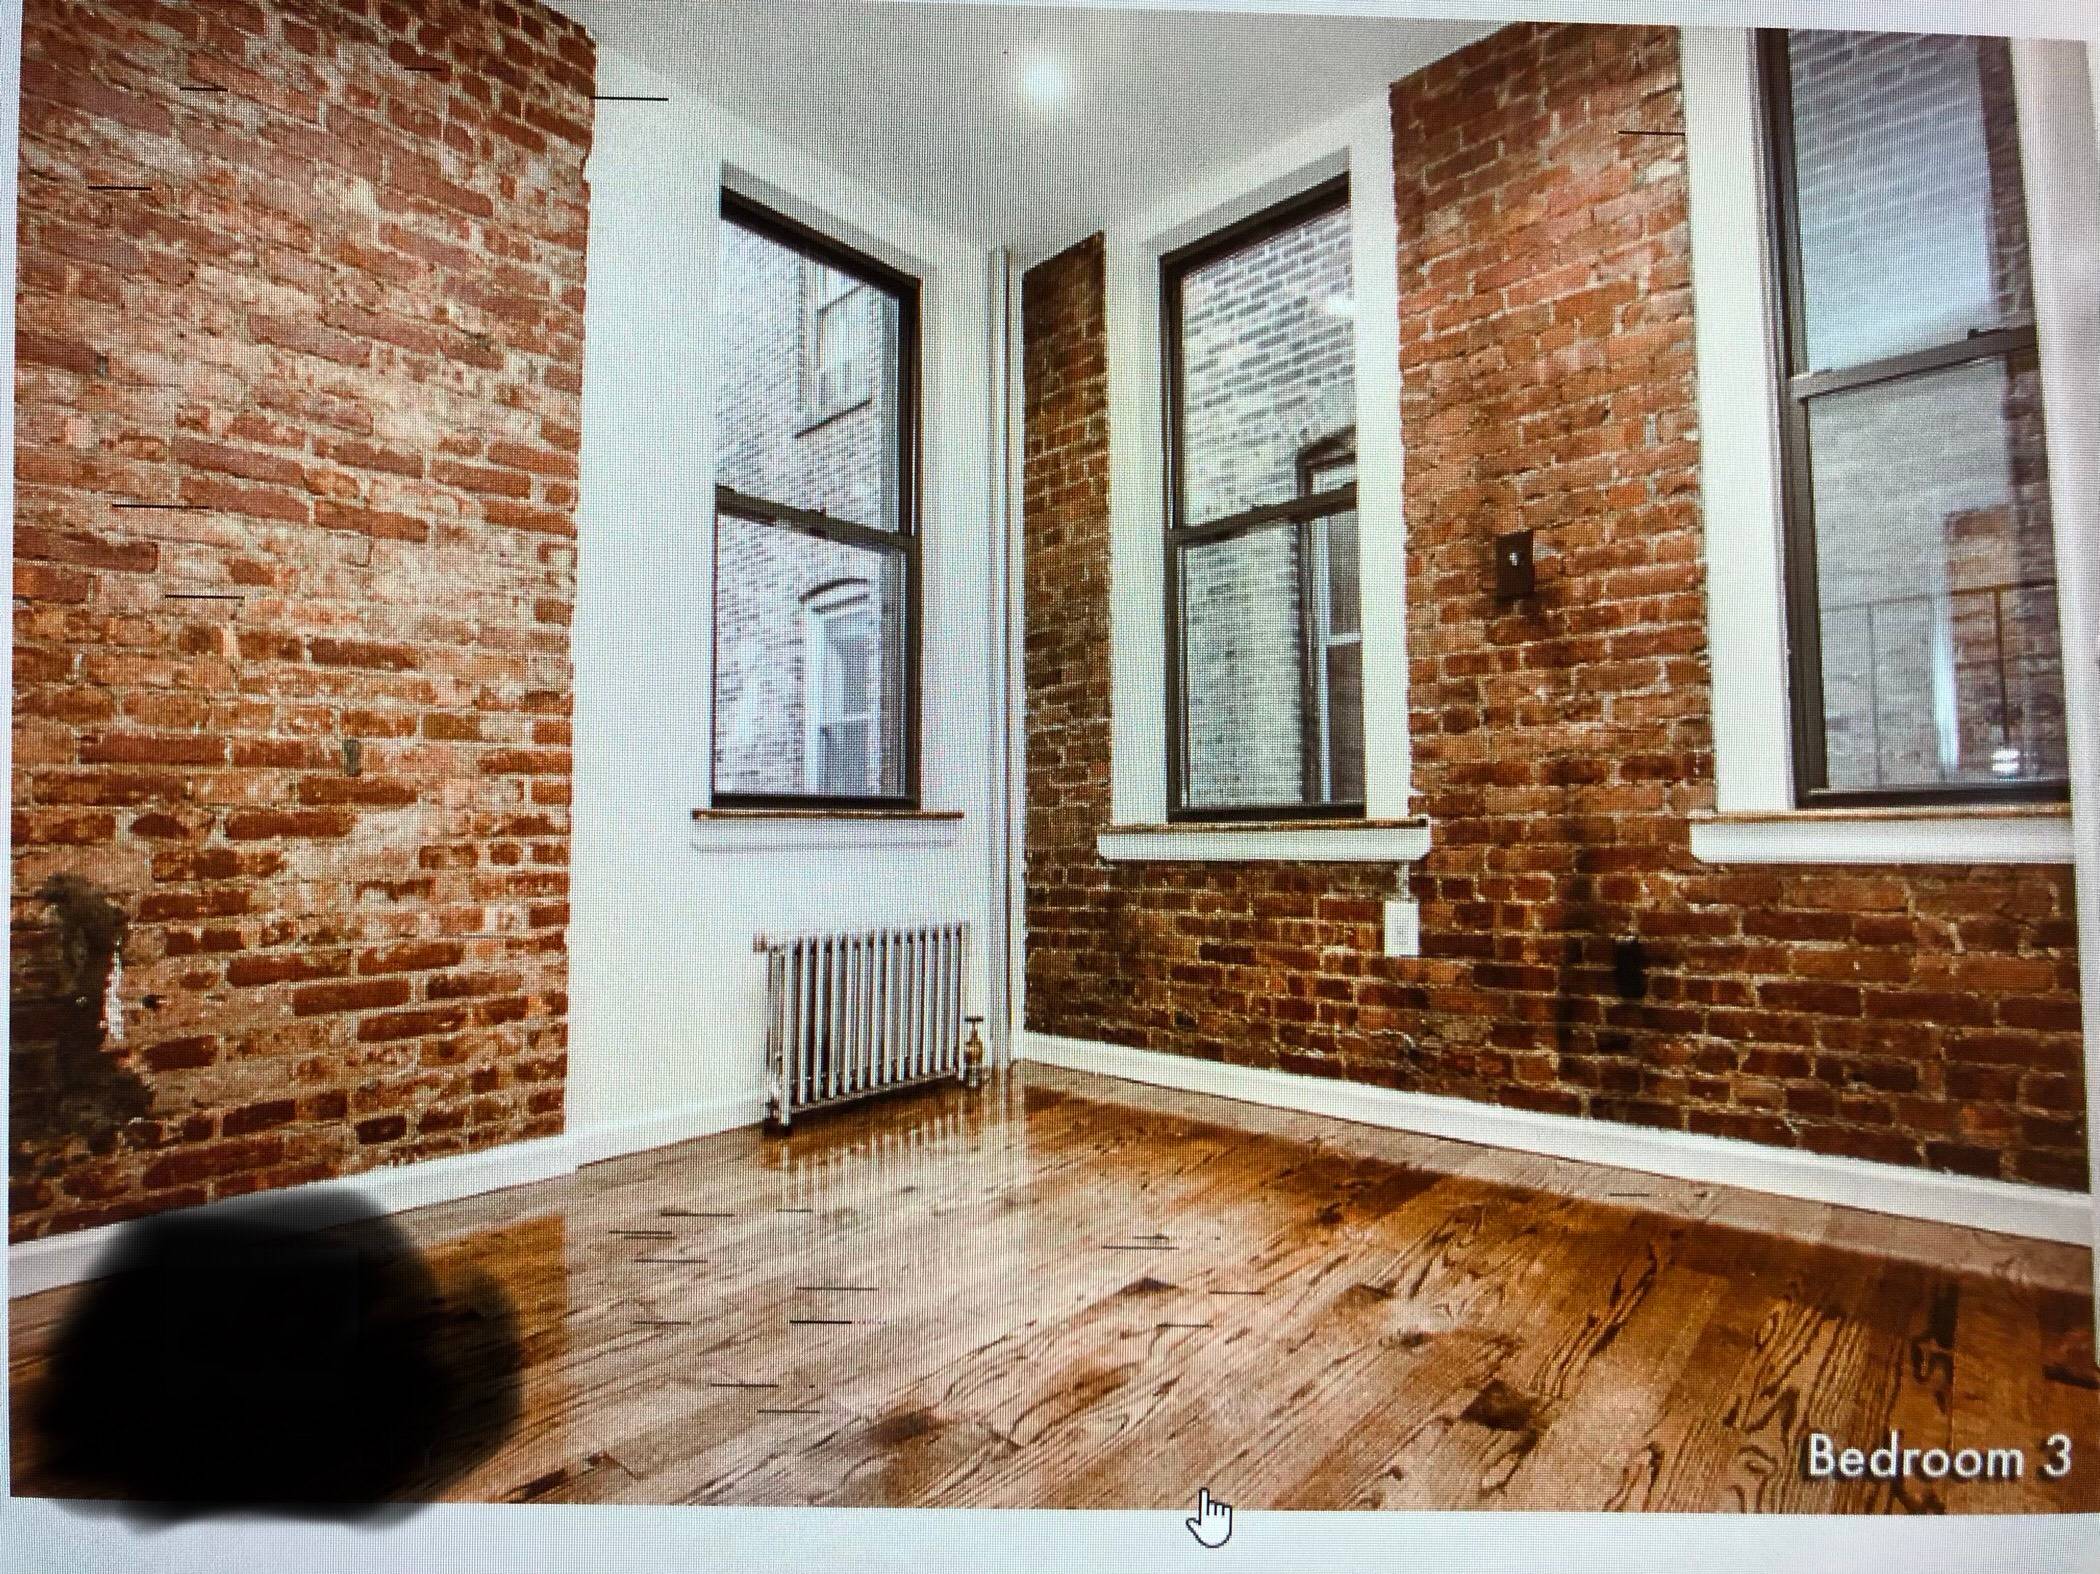 GREAT 3 BED, 2 BATH --  -- EAST VILLAGE -- STEPS FROM UNION SQUARE,ASTOR PLACE,PRIME EAST VILLAGE